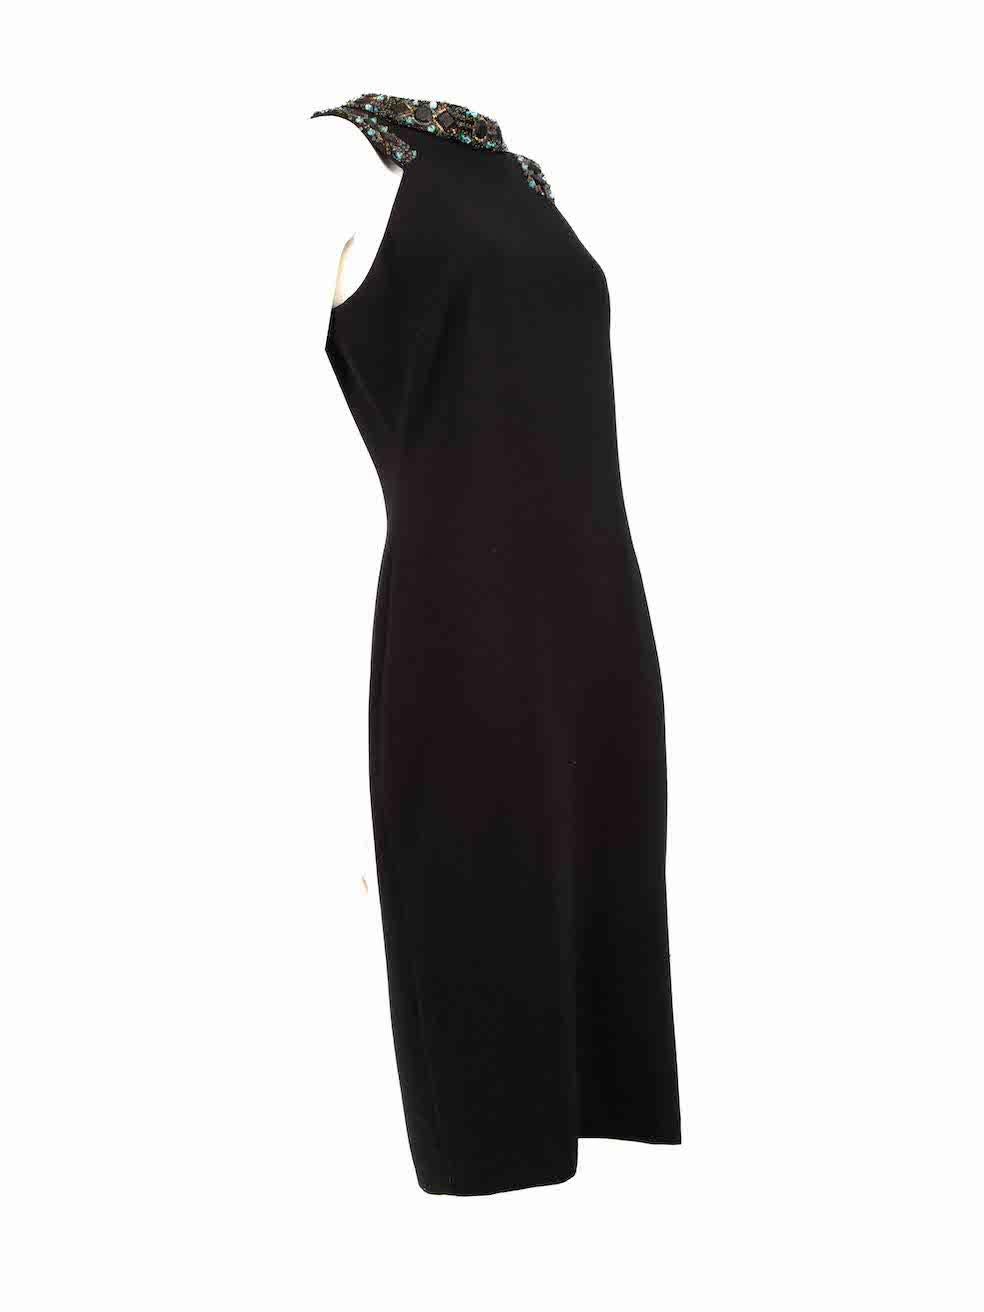 CONDITION is Very good. Minimal wear to dress is evident. Small pull to thread to the front top, front hip area, left bottom and the rear top on this used Badgley Mischka designer resale item.
 
 
 
 Details
 
 
 Black
 
 Polyester
 
 Dress
 
